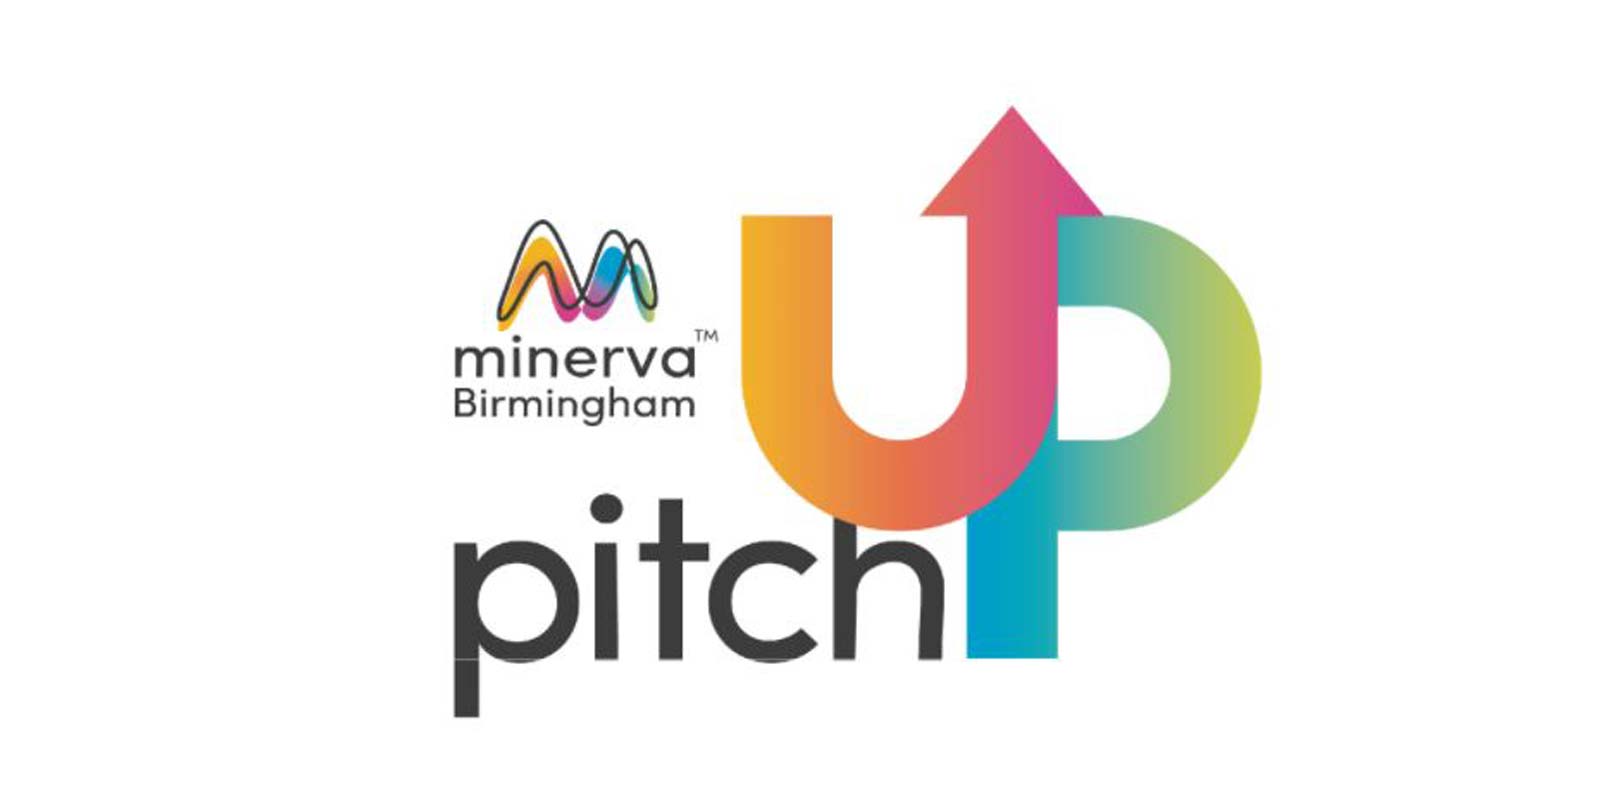 Seeking Business Investment? Apply to Minerva Birmingham Pitch Up 2022 